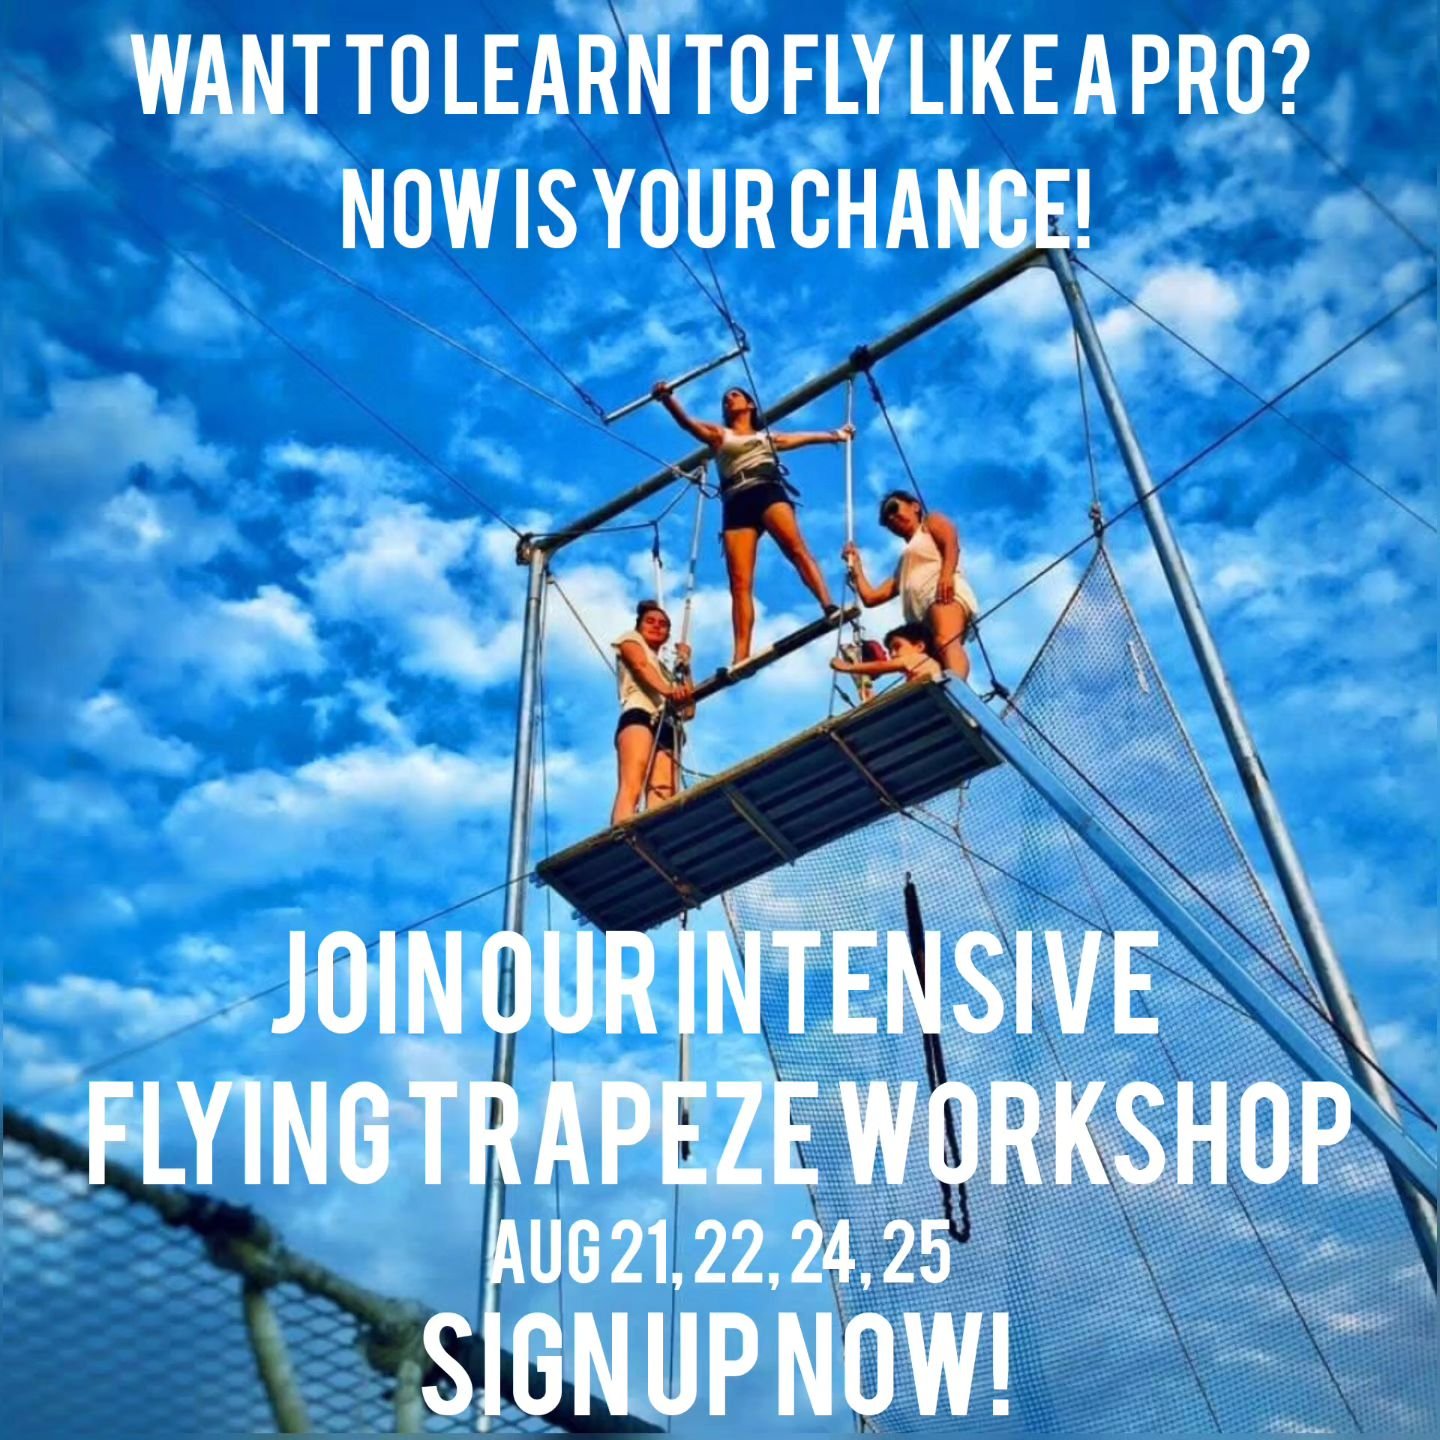 Sign ups are open for our August Flying Trapeze Intensive! Come learn to fly like a pro!

Four nights of intense flying with exclusive and detailed coaching.
 August 21st, 22nd, 24th, and 25th
  7pm - 9pm

Sign up by August 1st and get a free Hampton